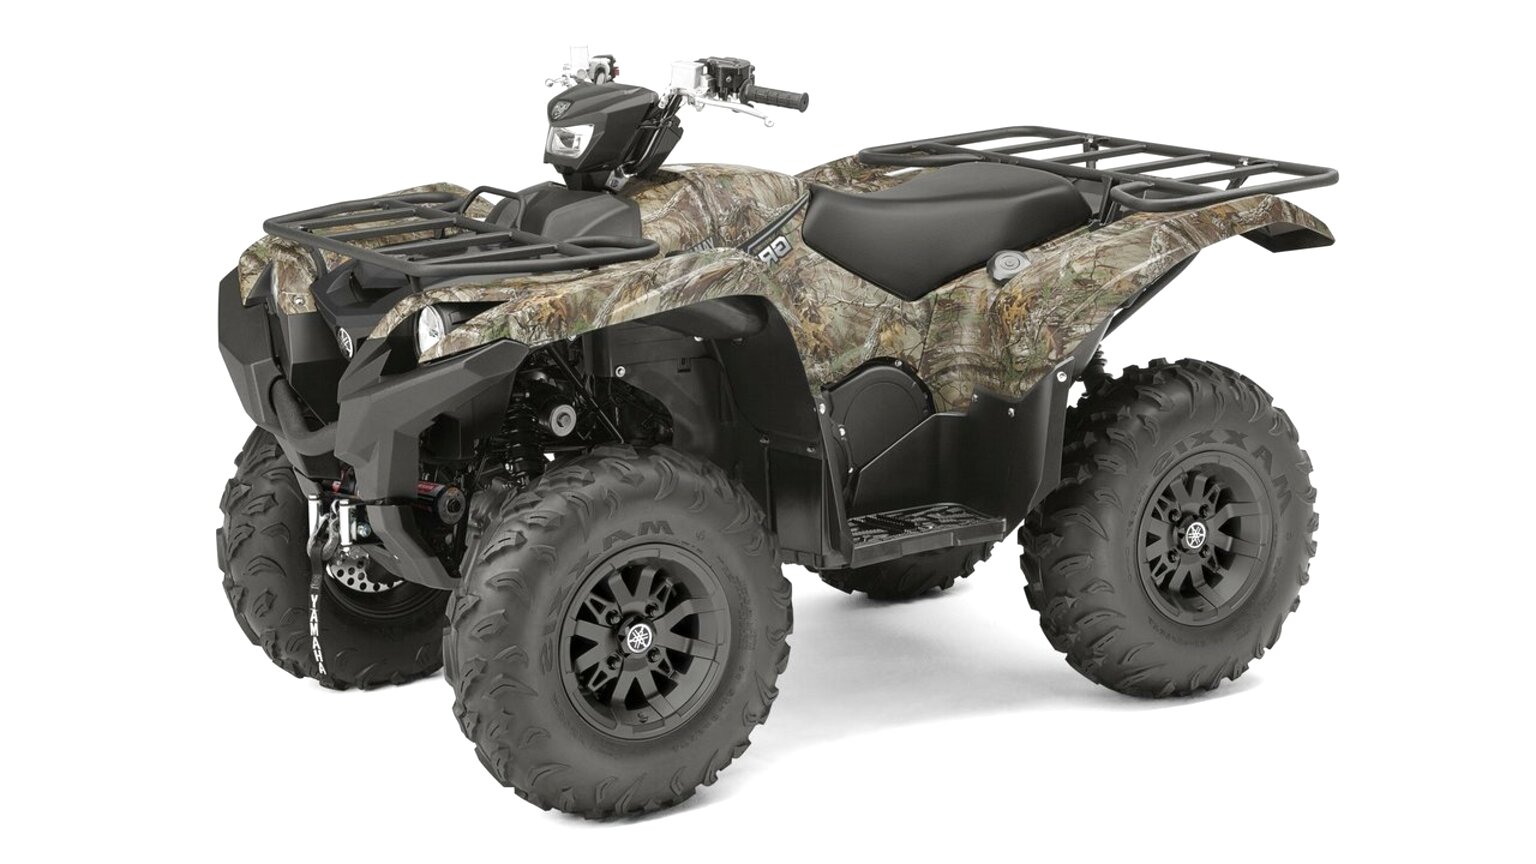 Yamaha Grizzly Quad for sale in UK | 65 used Yamaha Grizzly Quads